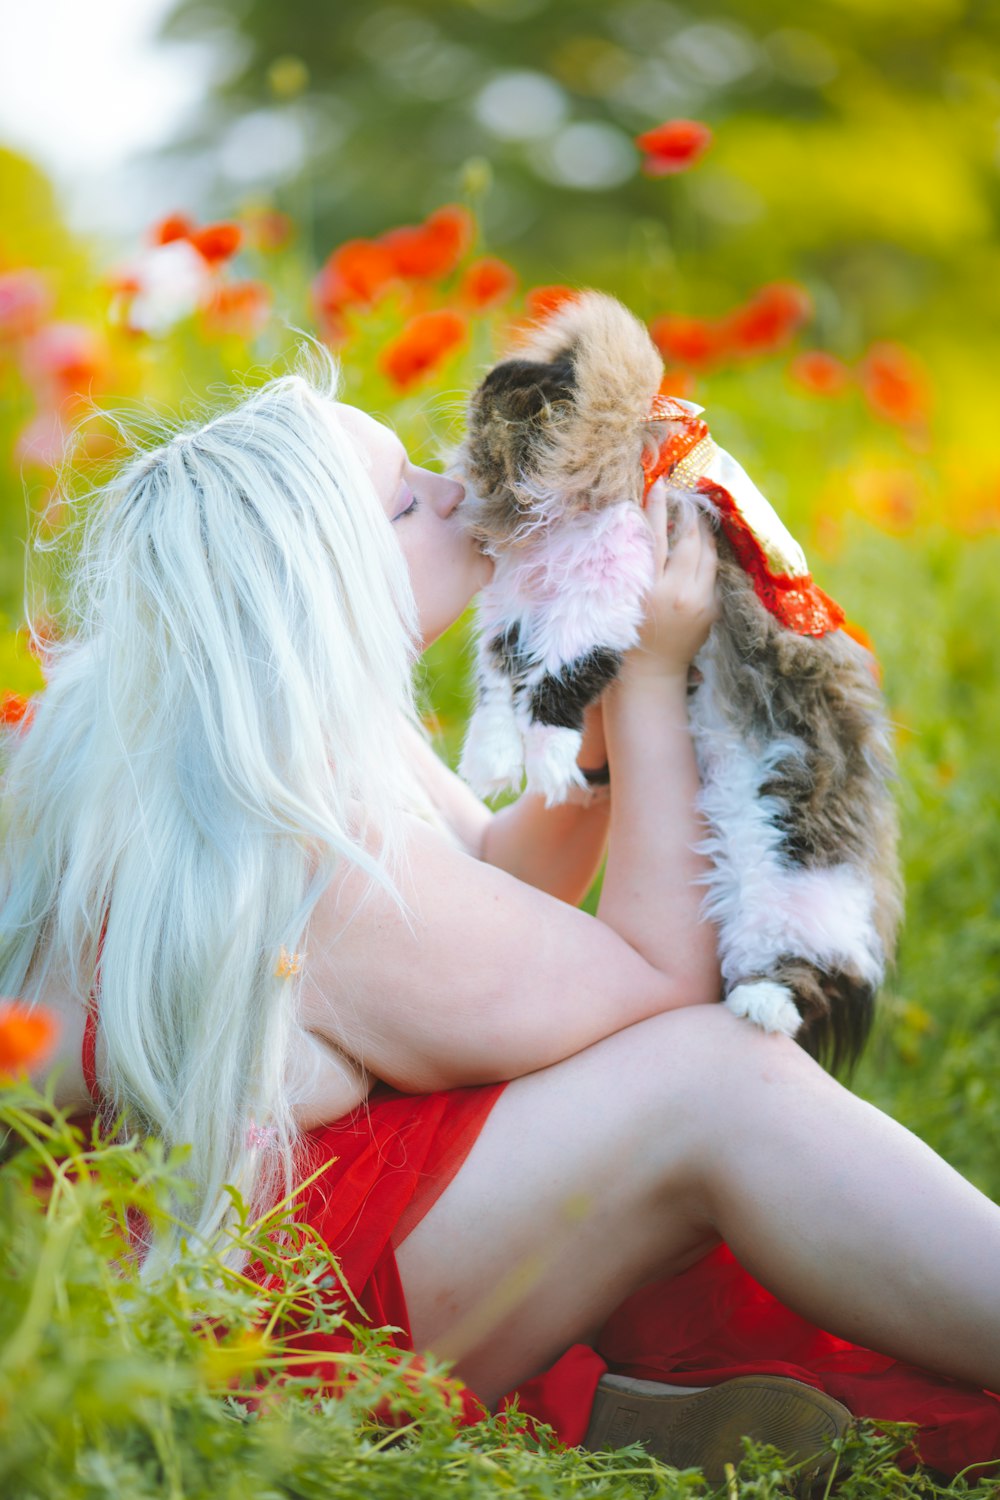 a woman in a red dress is holding a cat